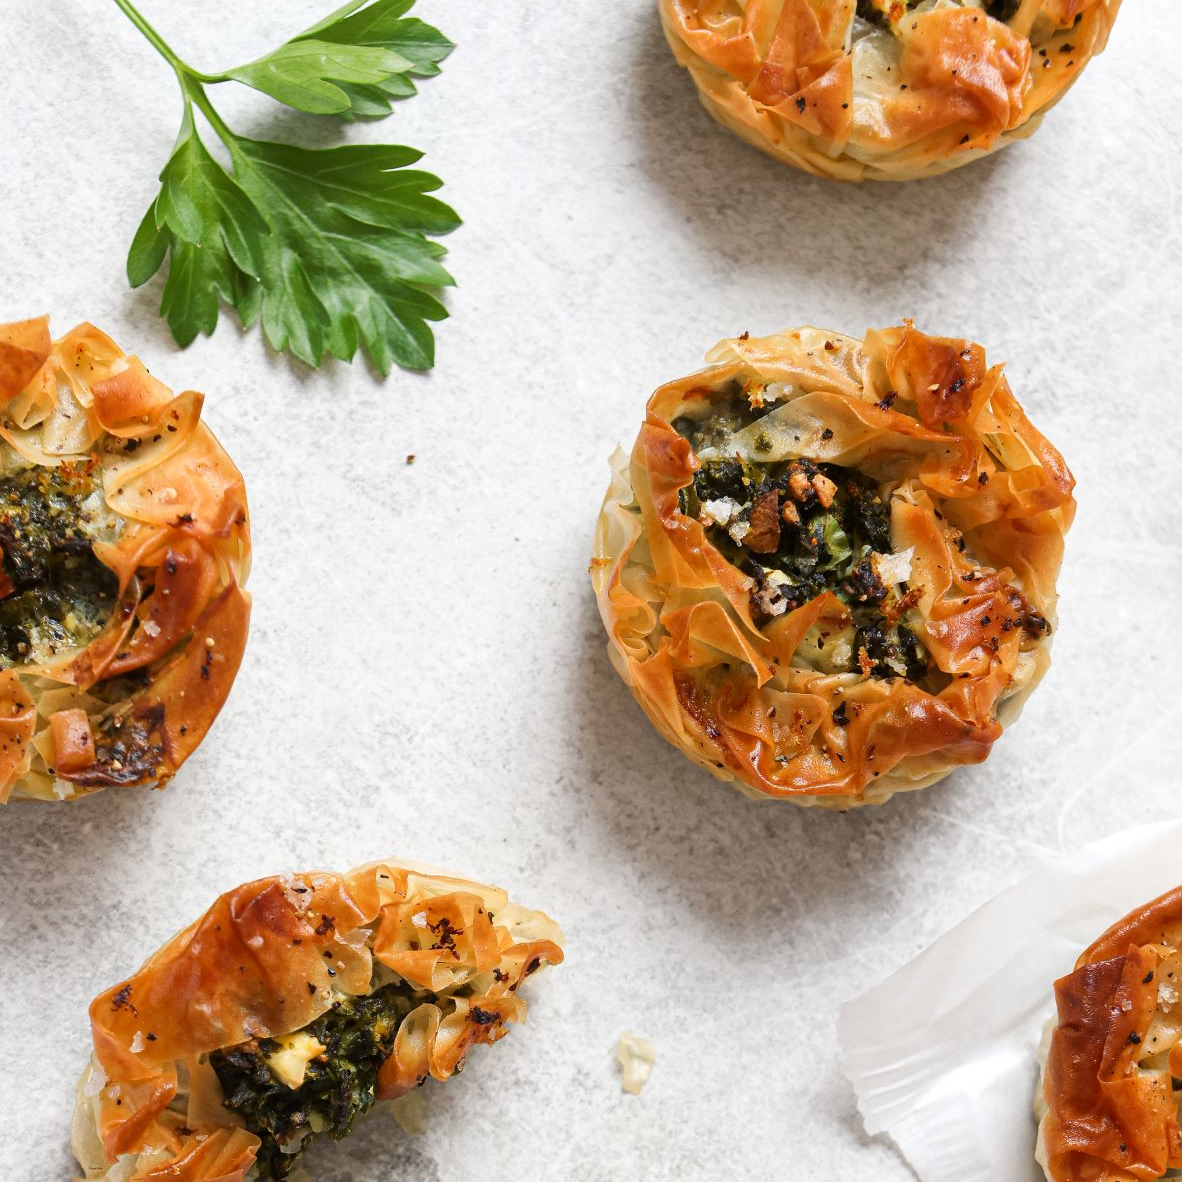 Spinach and feta pies